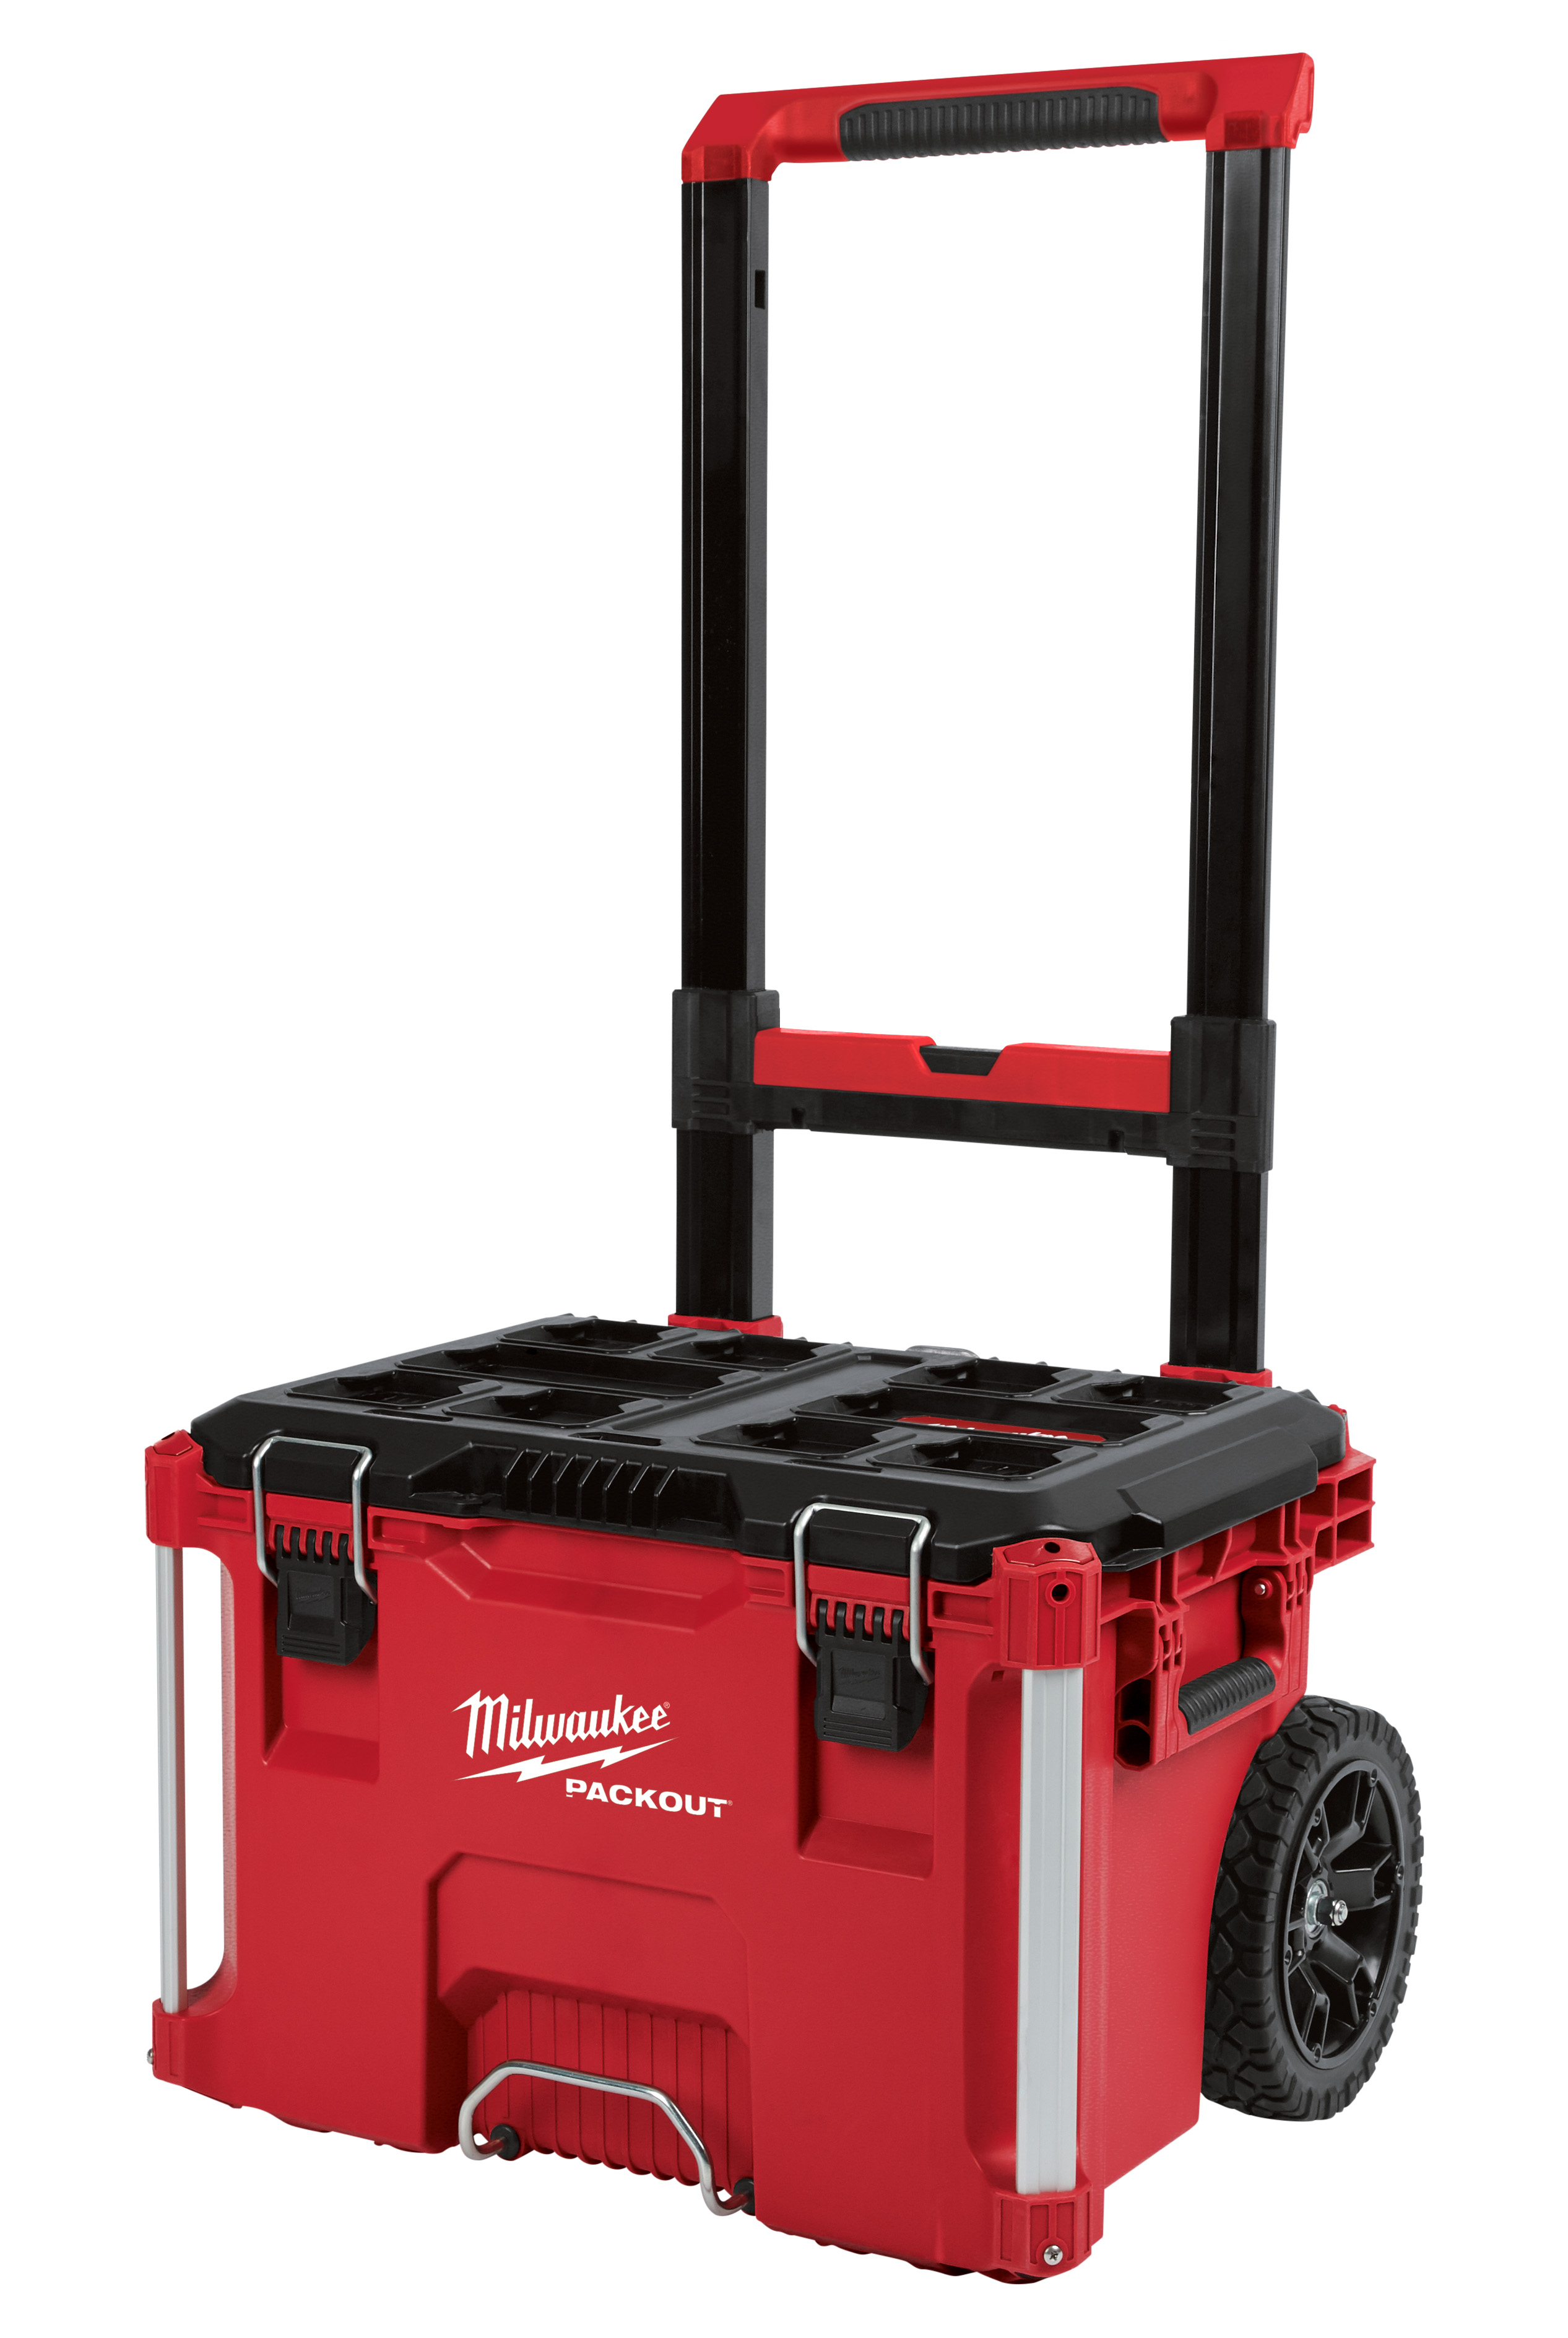 Part of the industry’s most versatile and most durable modular storage system, the Milwaukee PACKOUT™ rolling tool box is constructed with impact resistant polymers, an industrial grade extension handle, 9 in. all terrain wheels and metal reinforced corners to provide up to 250 lbs of weight capacity in harsh jobsite conditions. Featuring an IP65 rated weather seal to keep out rain and jobsite debris, the Milwaukee PACKOUT™ rolling tool box is fully compatible with all Milwaukee PACKOUT™ modular storage products.